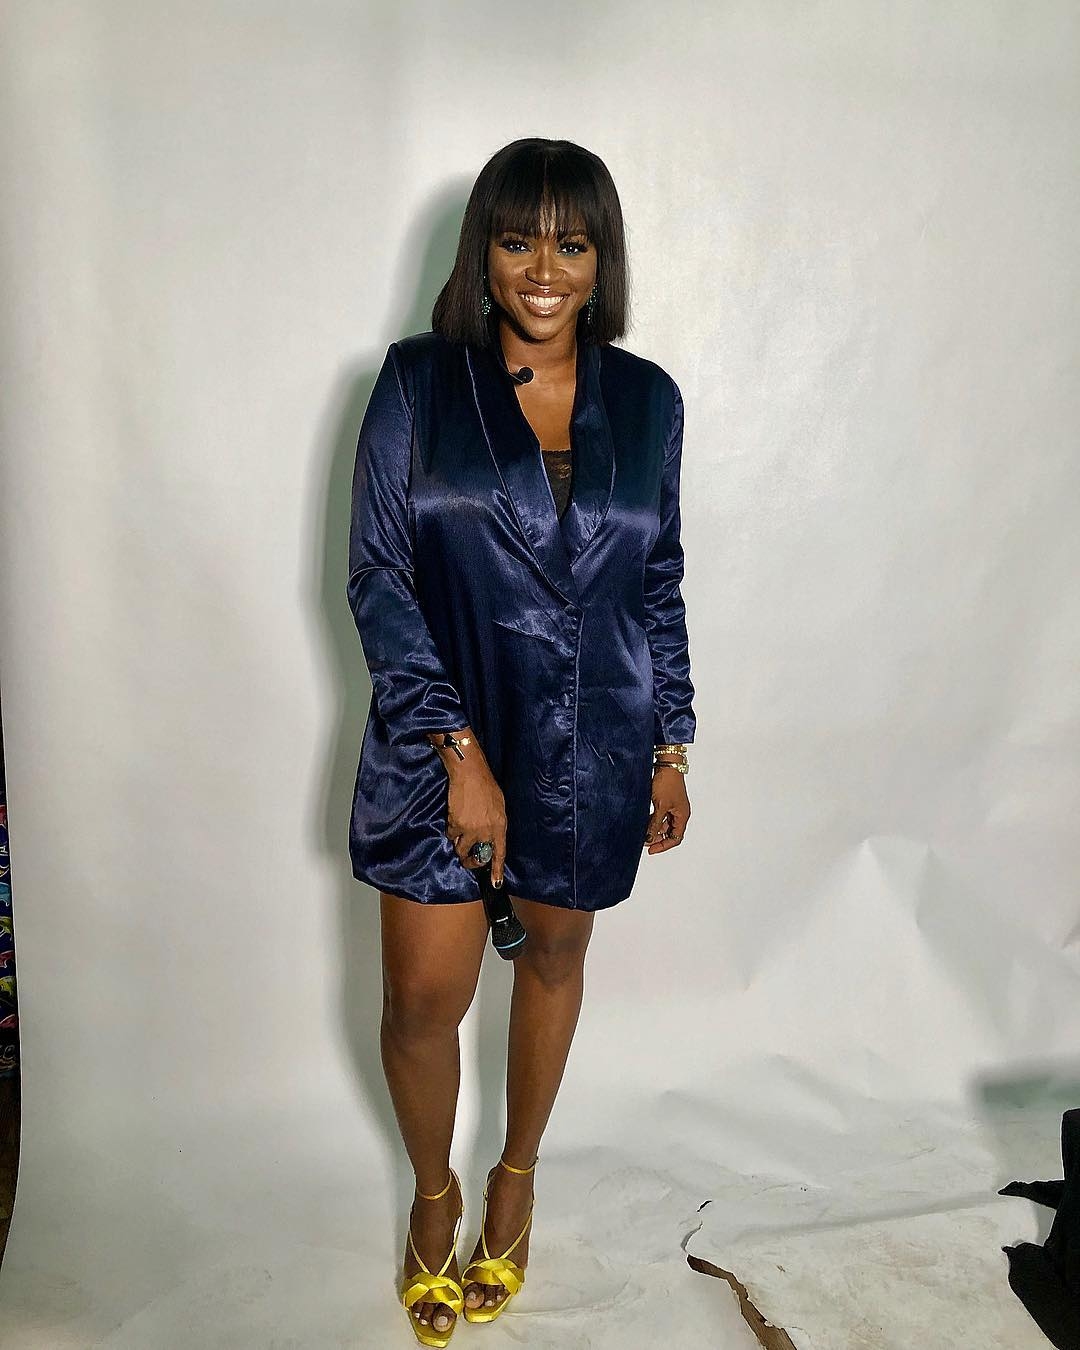 Nigerian Singer Waje Is Steadily On The Rise With Her Fashion Choices